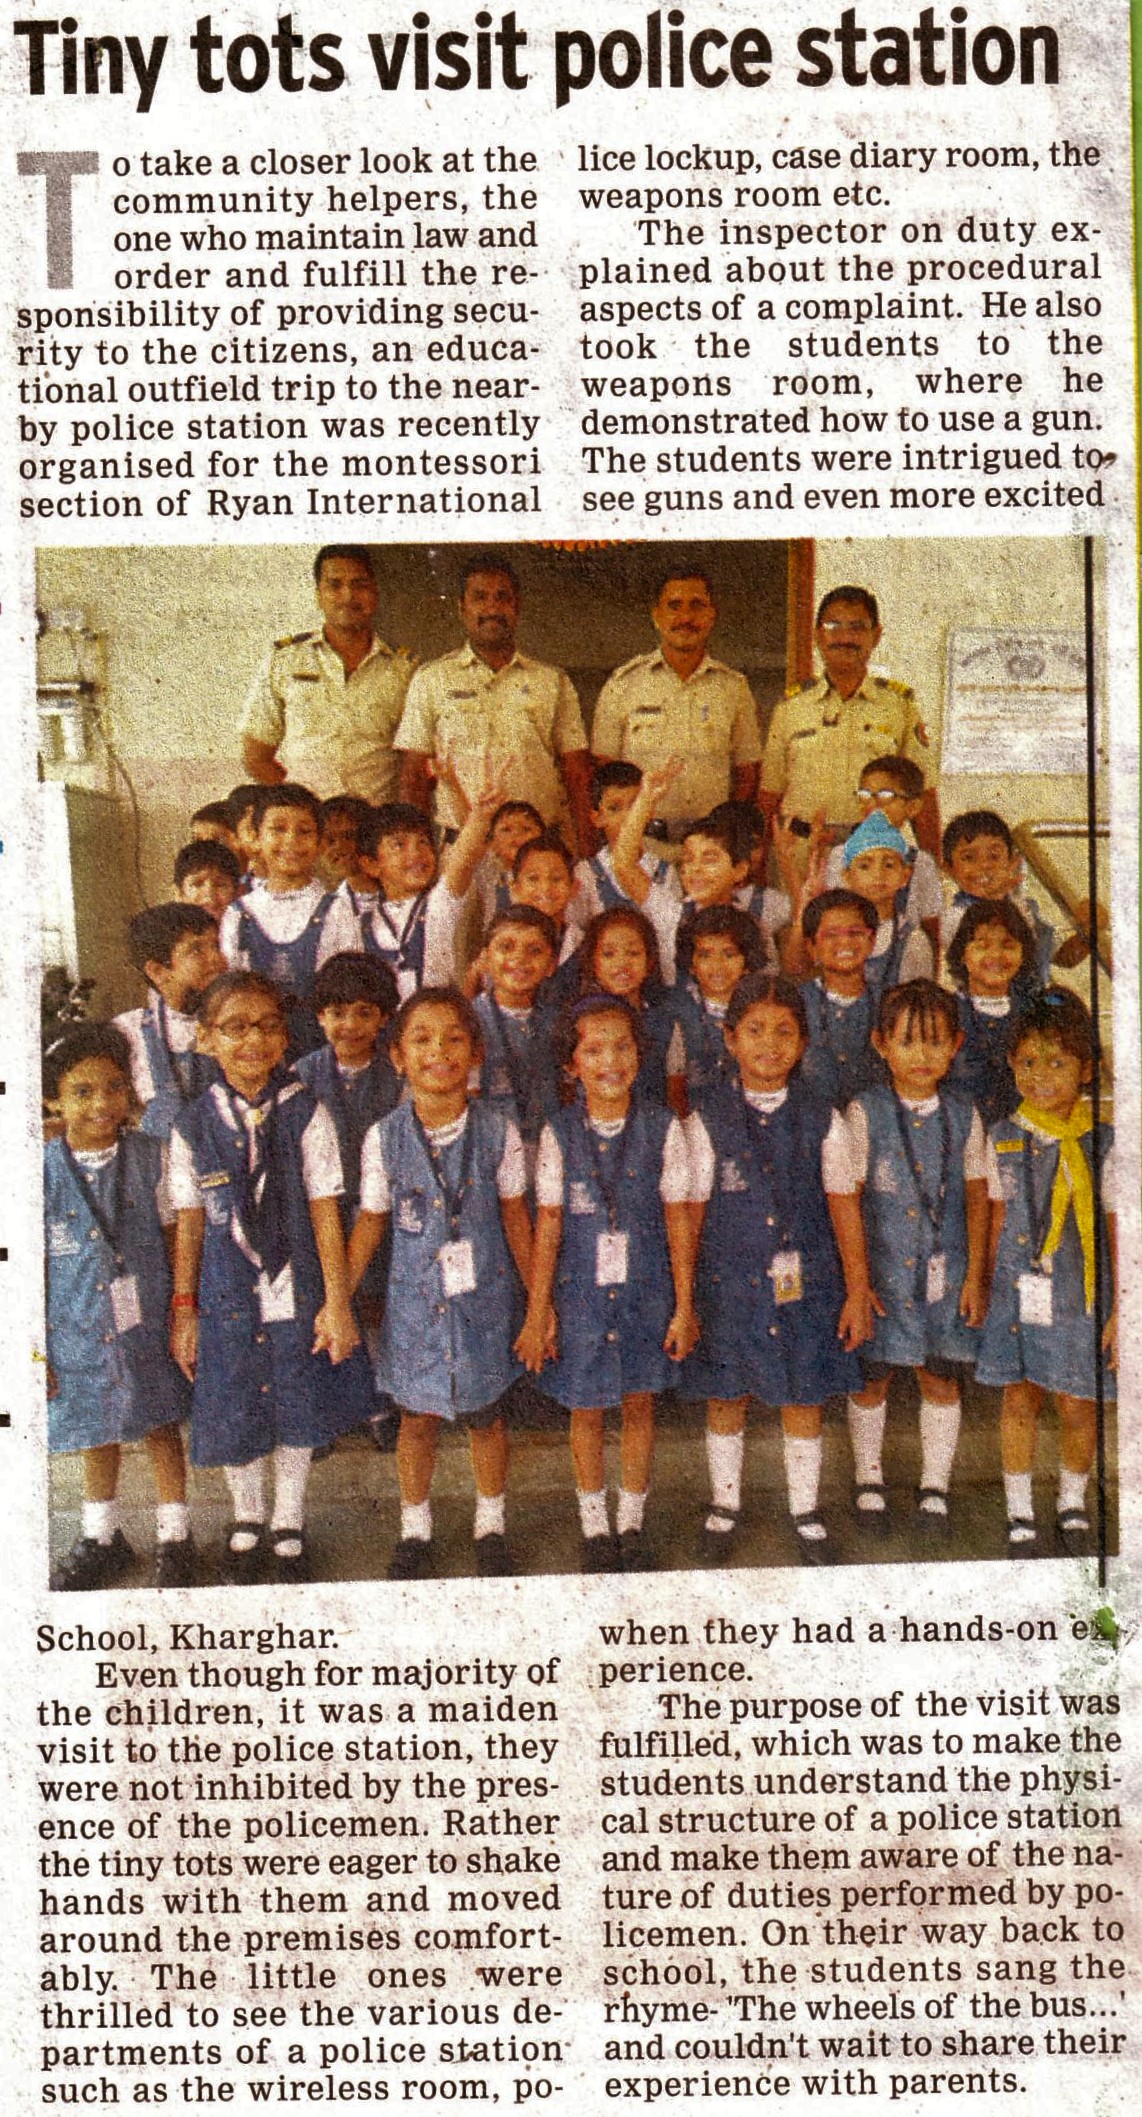 Tiny tots visit Police station was mentioned in News band - Ryan International School, Kharghar